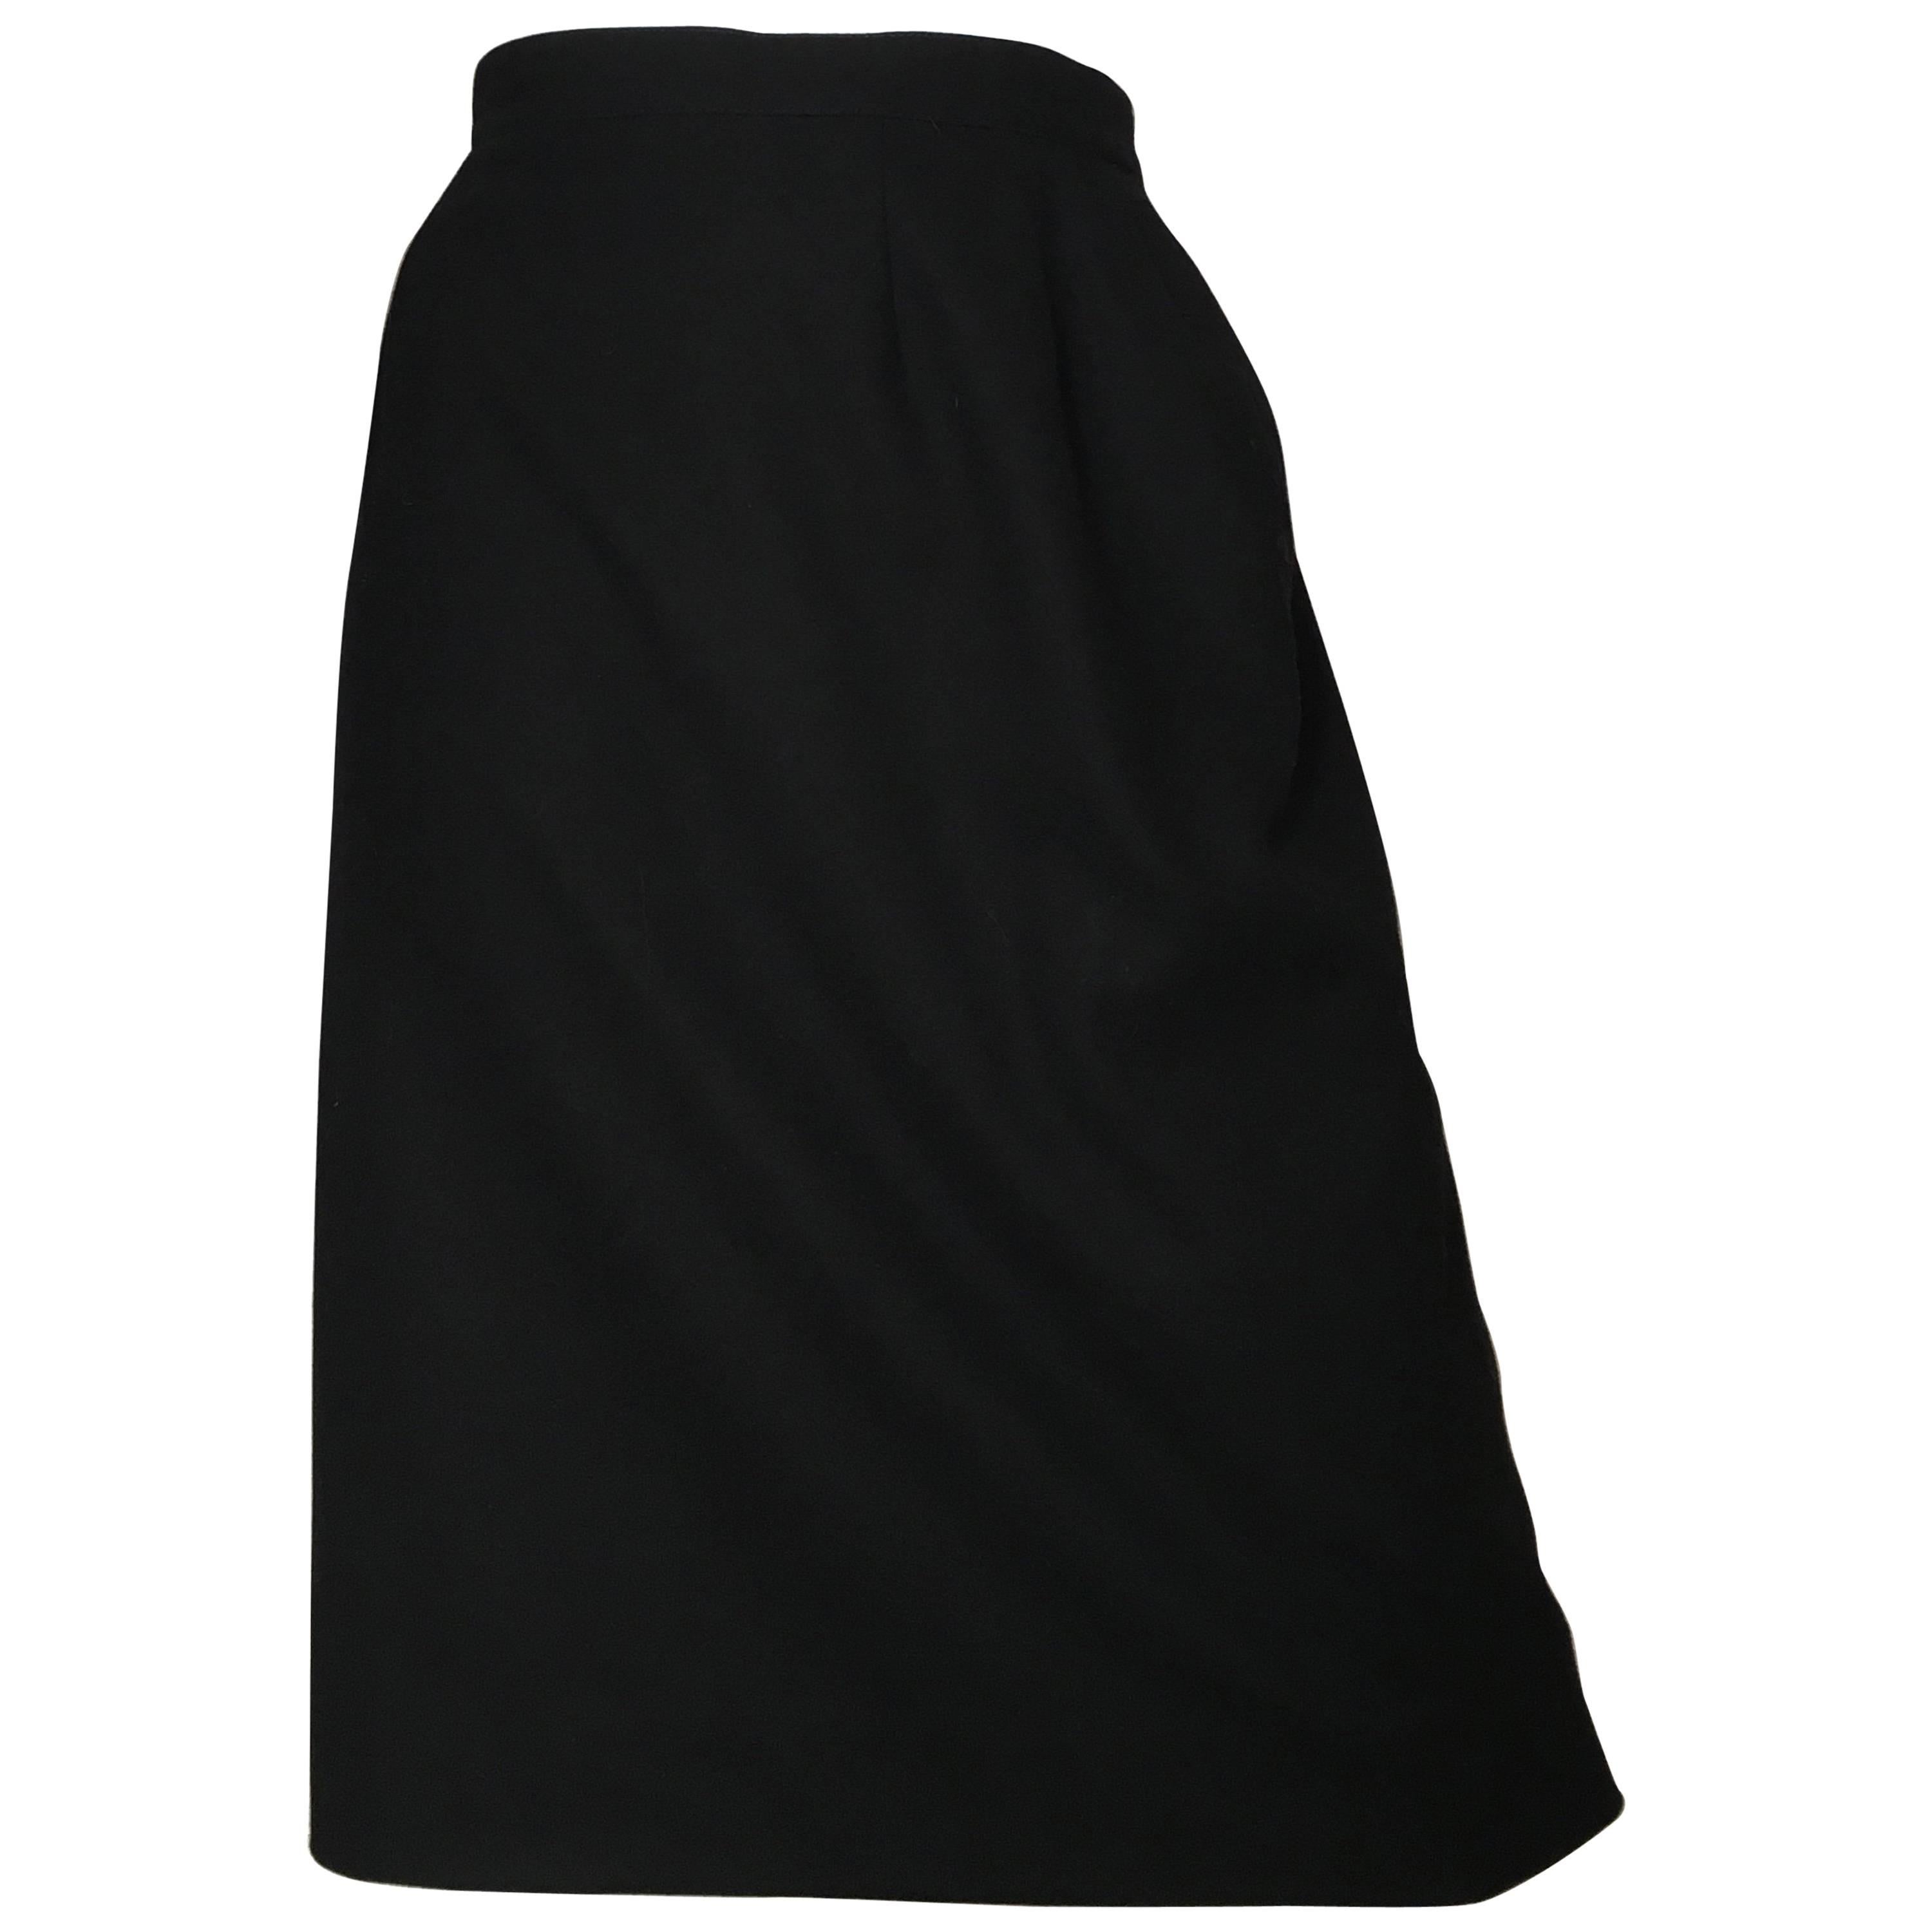 Karl Lagerfeld for Neiman Marcus 1980s Black Wool Cashmere Pencil Skirt Size 6. For Sale